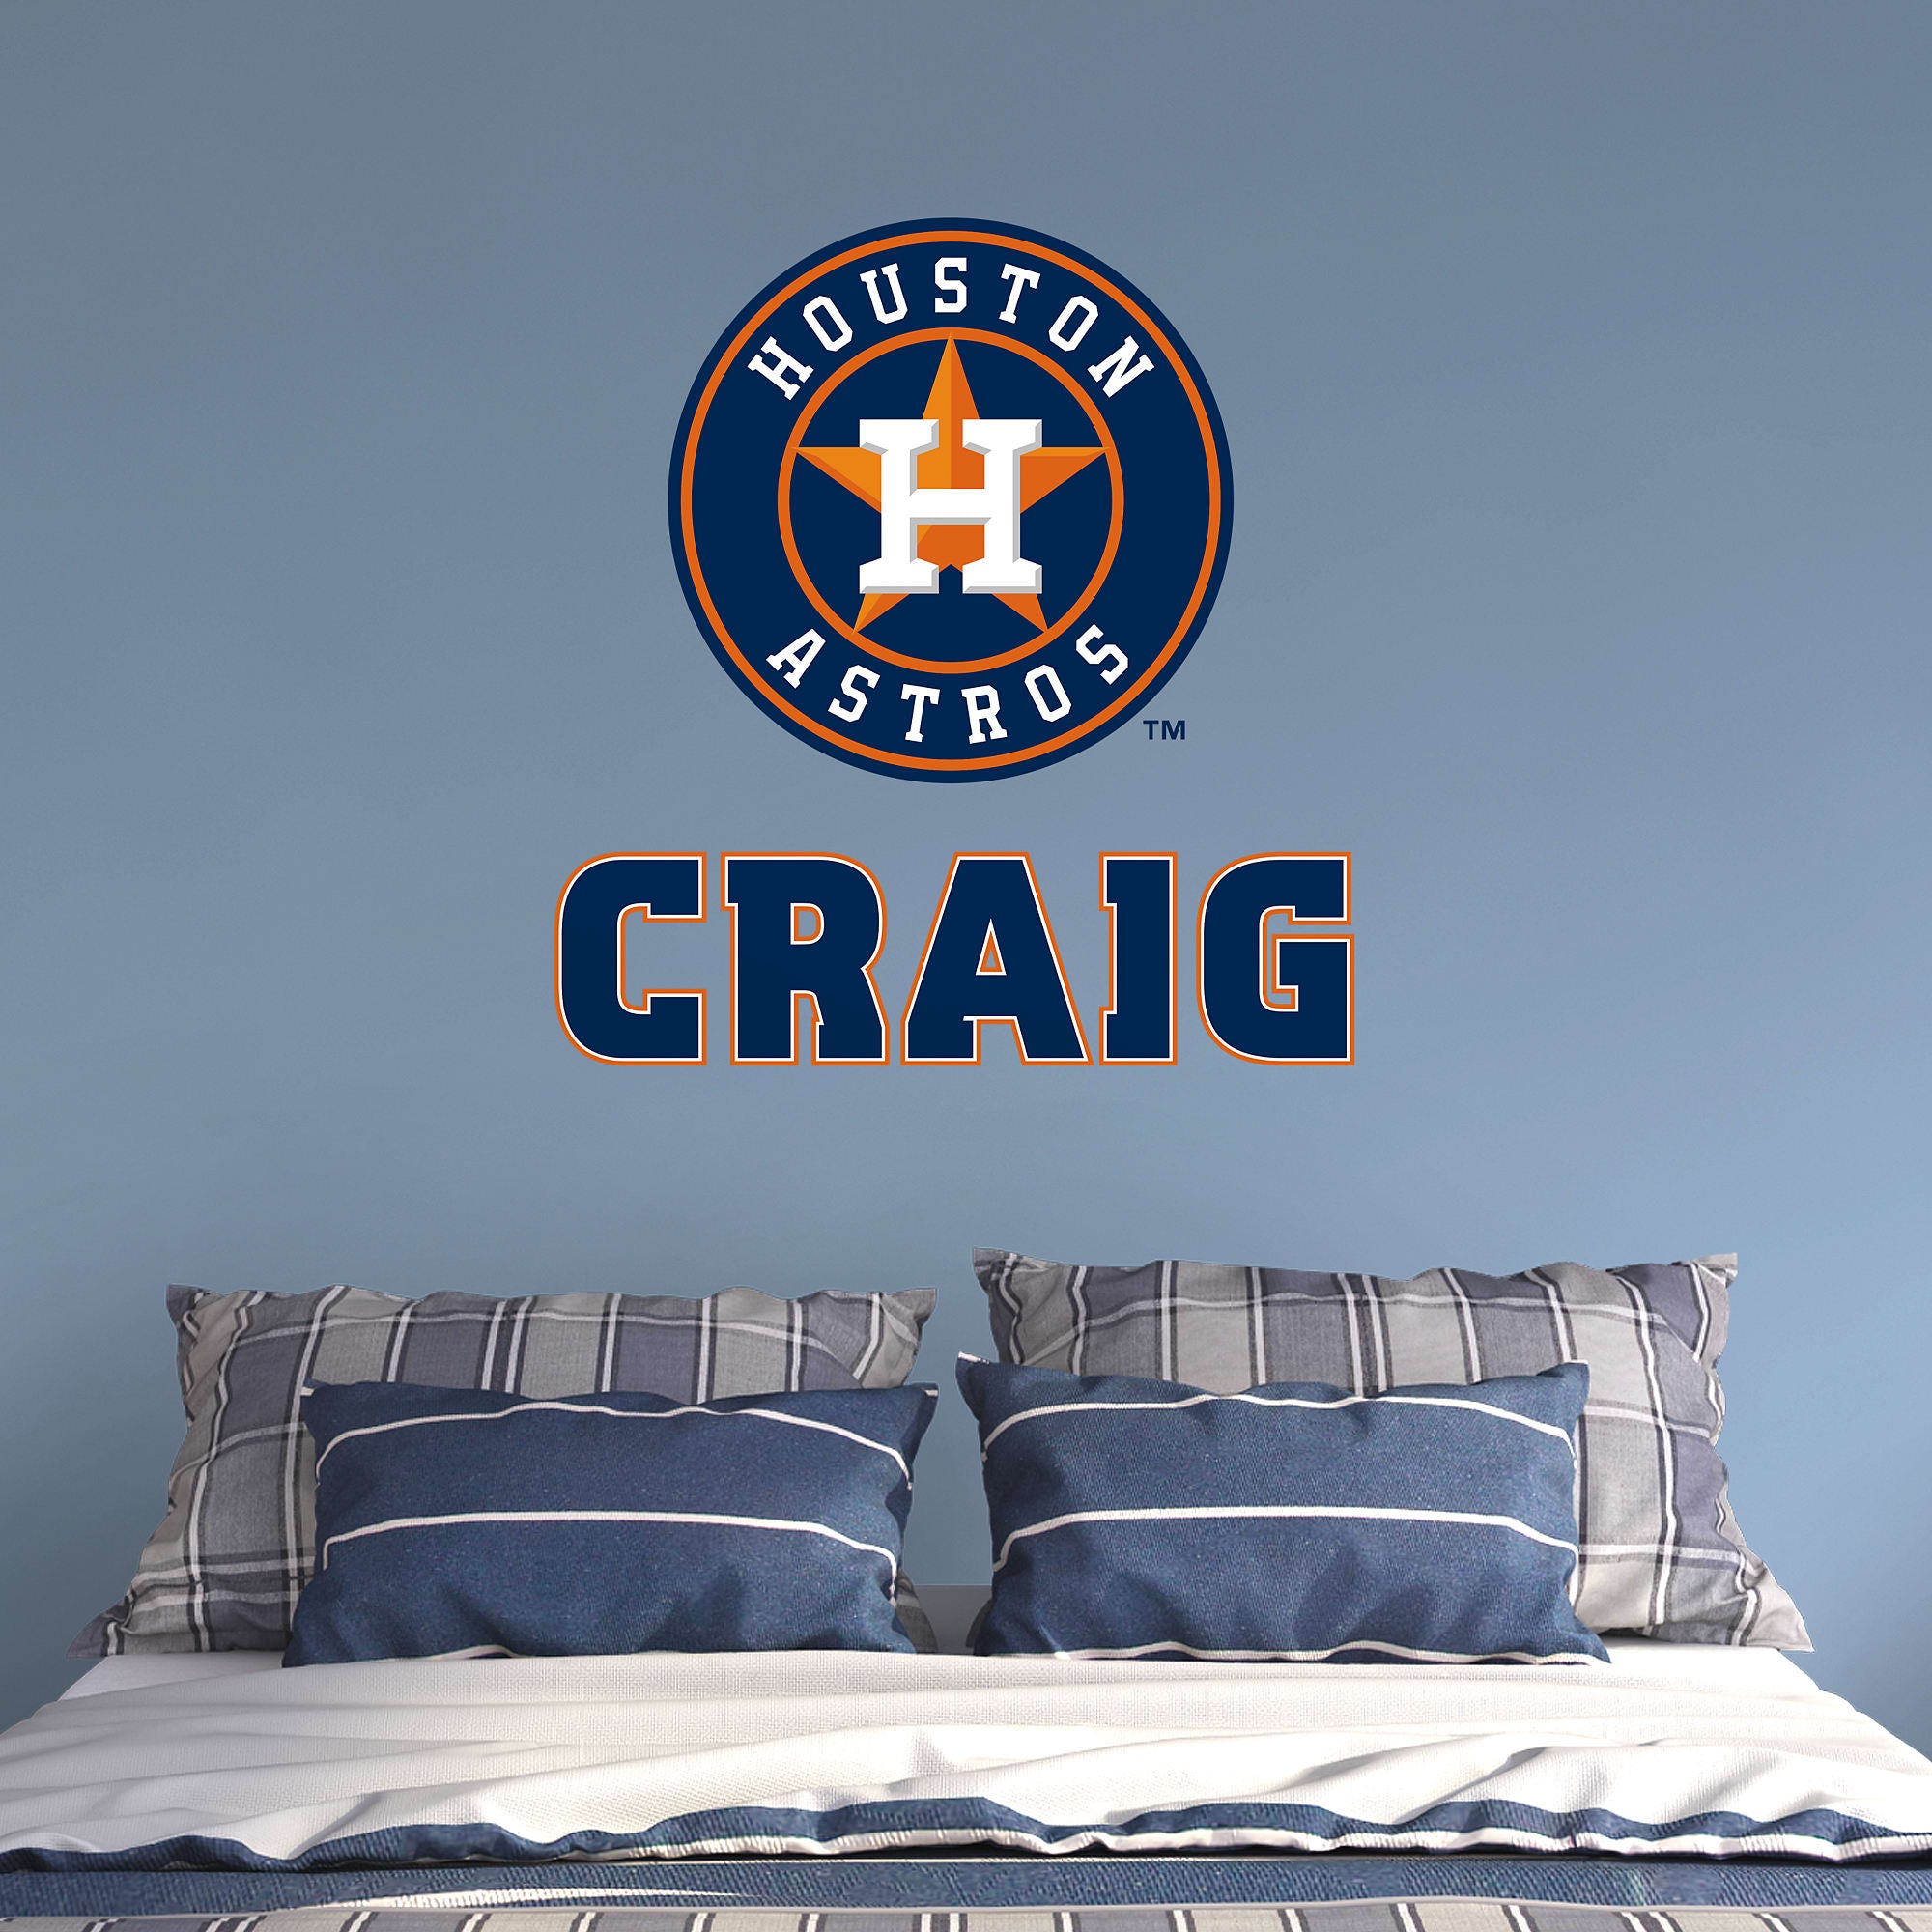 Houston Astros: Stacked Personalized Name - Officially Licensed MLB Transfer Decal in Navy (52"W x 39.5"H) by Fathead | Vinyl